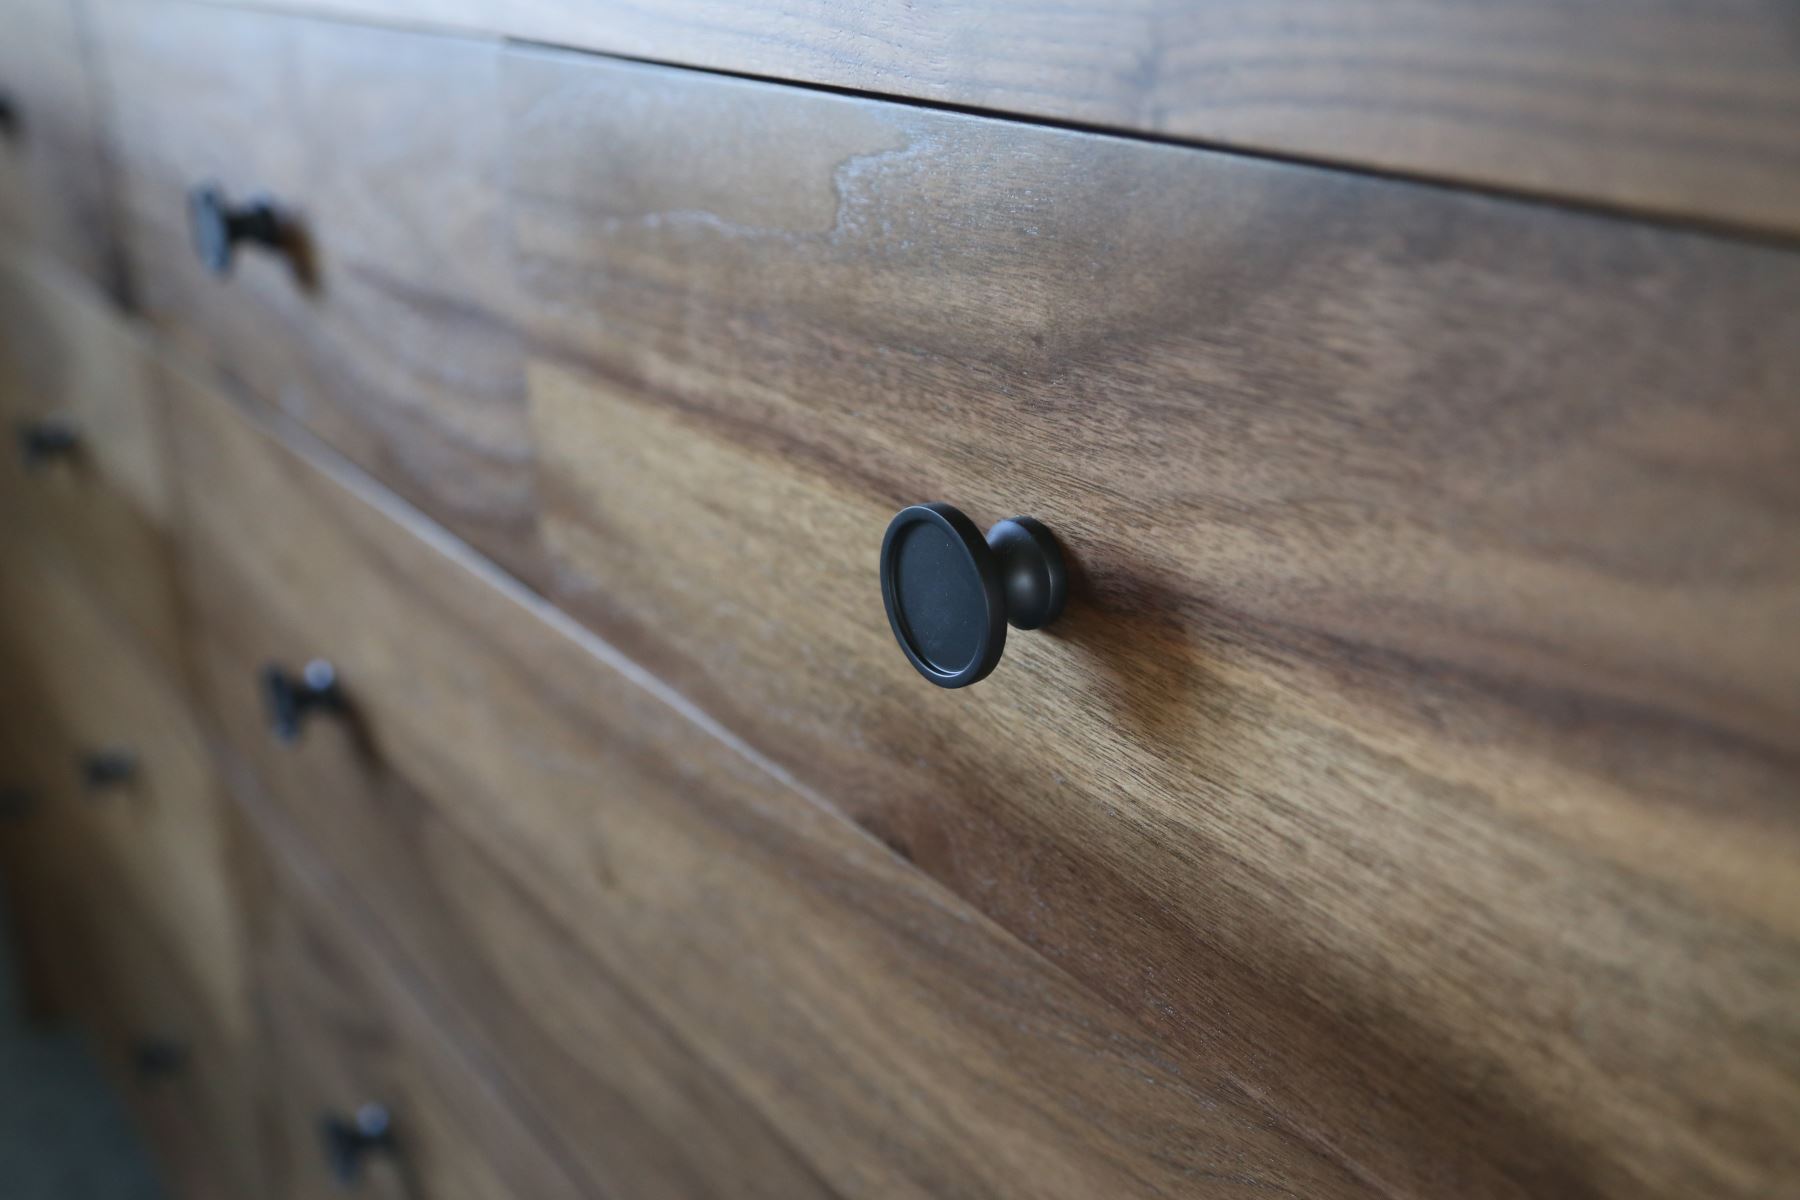 Retrofitted knobs from Rejuvenation